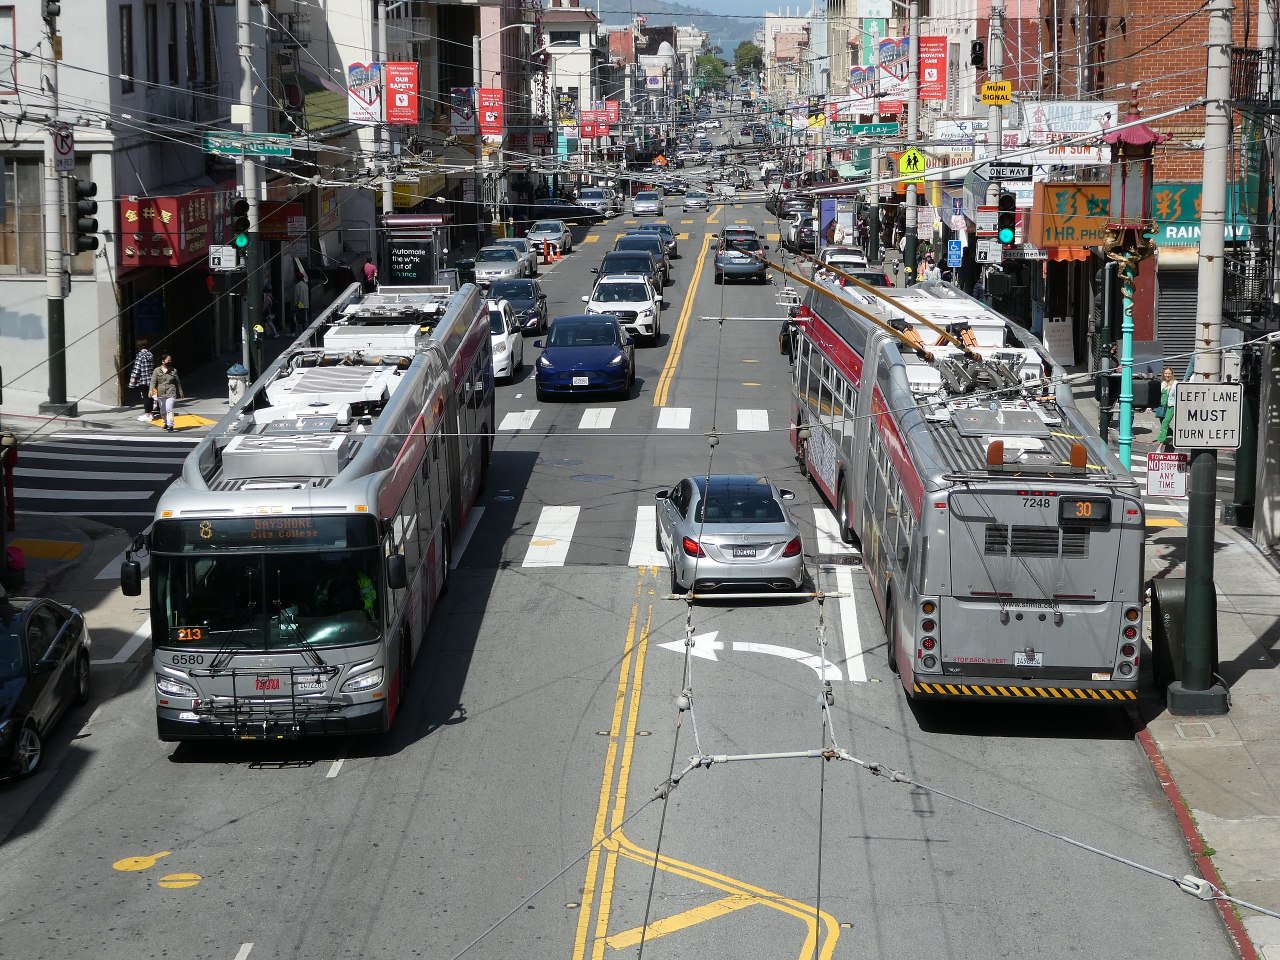 Buses in Chinatown. Image: Wikimedia Commons